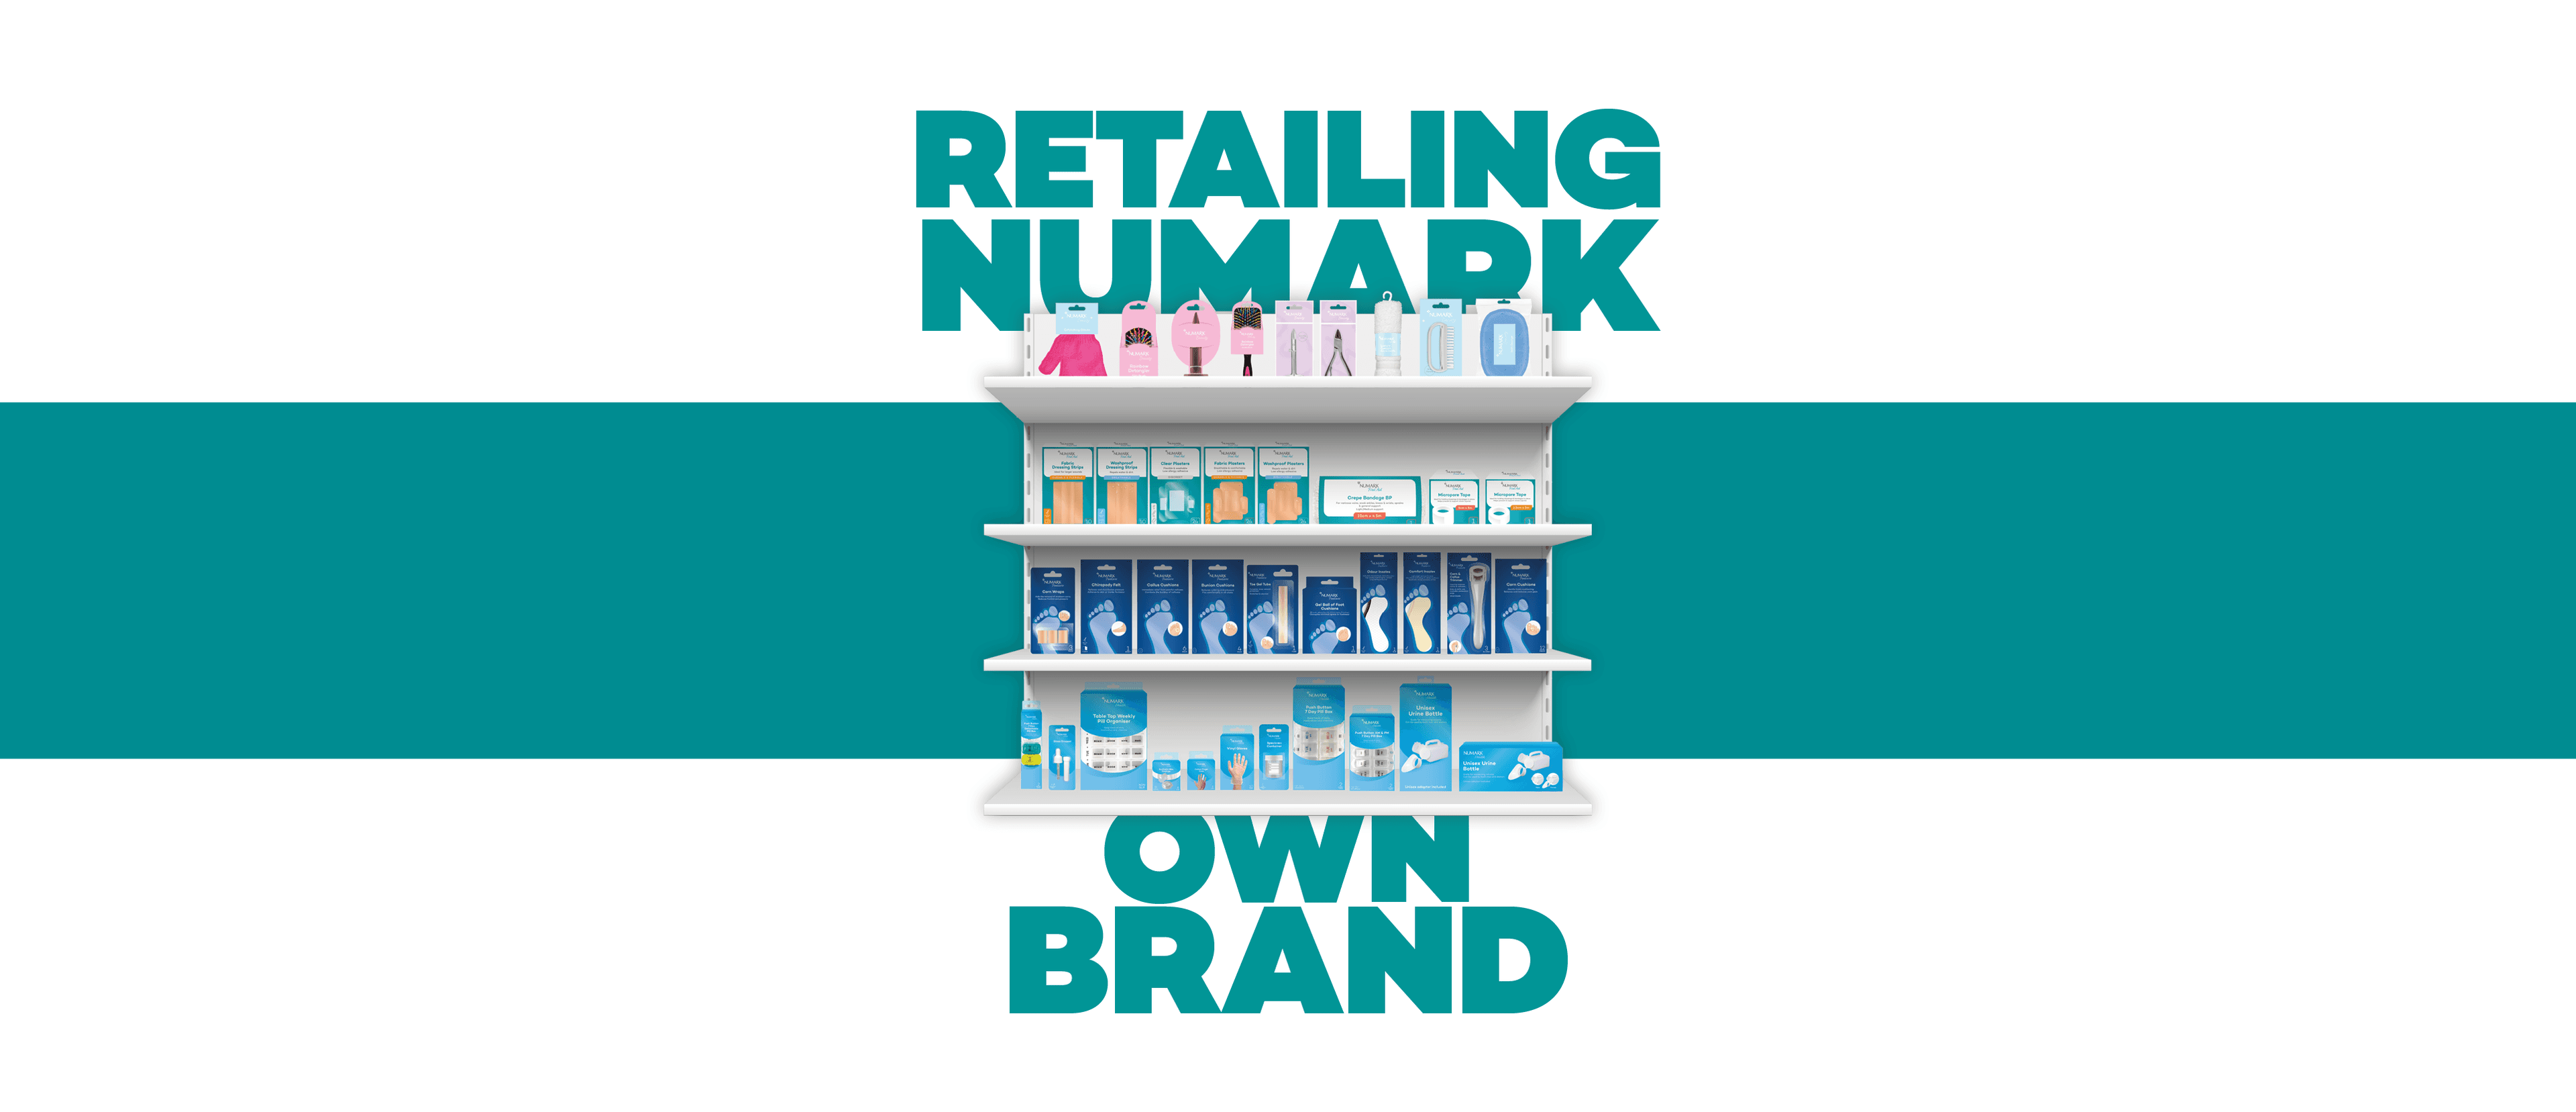 retailing own brand